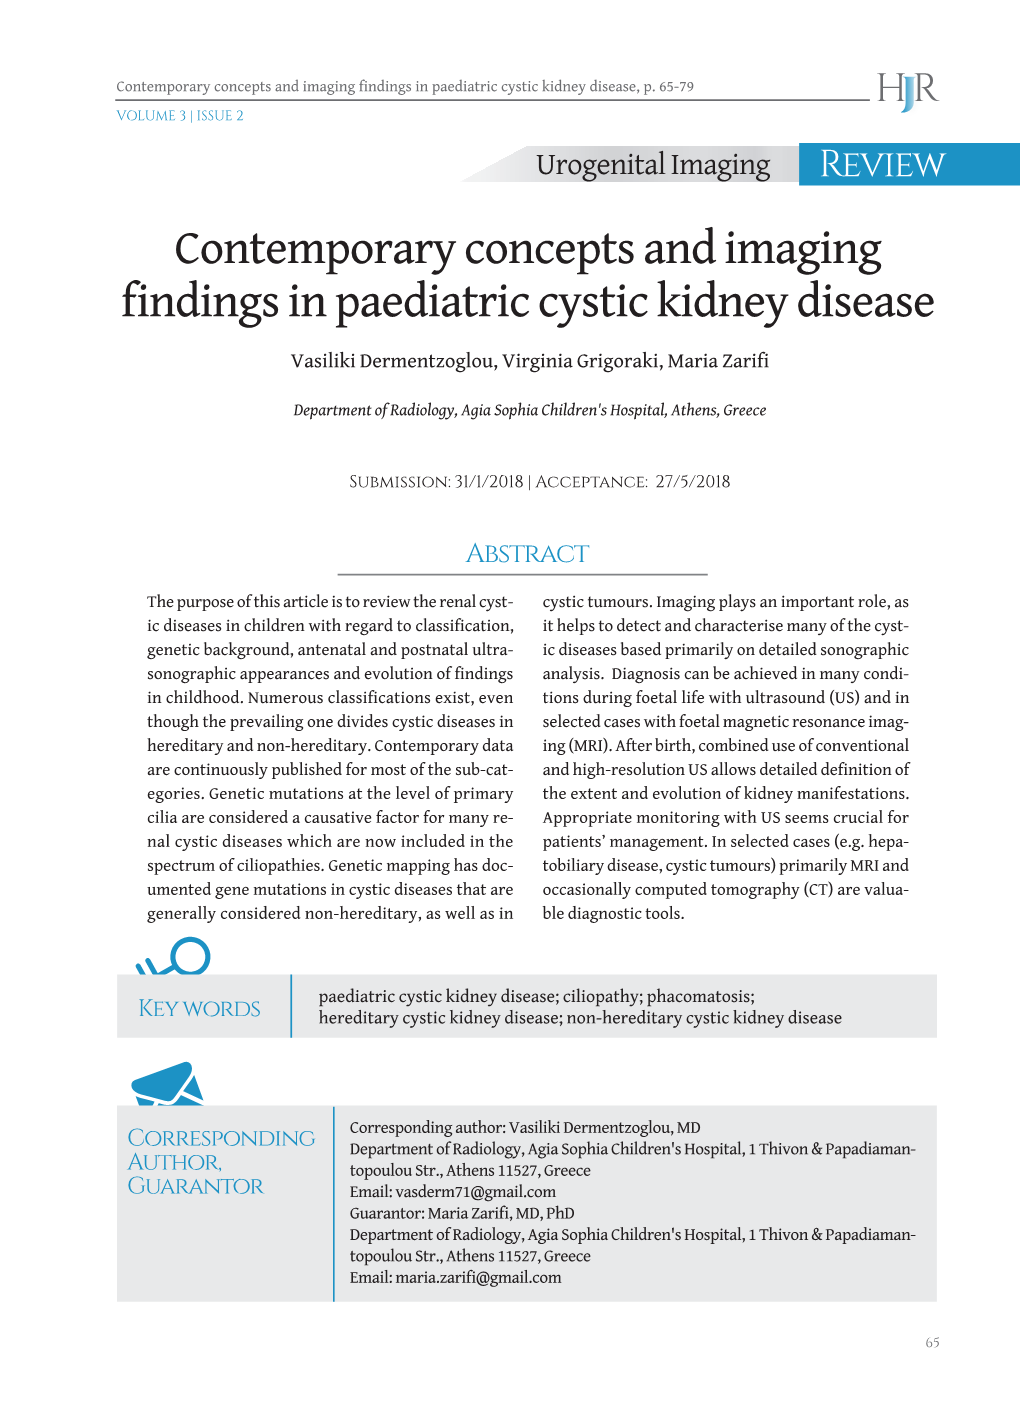 Contemporary Concepts and Imaging Findings in Paediatric Cystic Kidney Disease, P